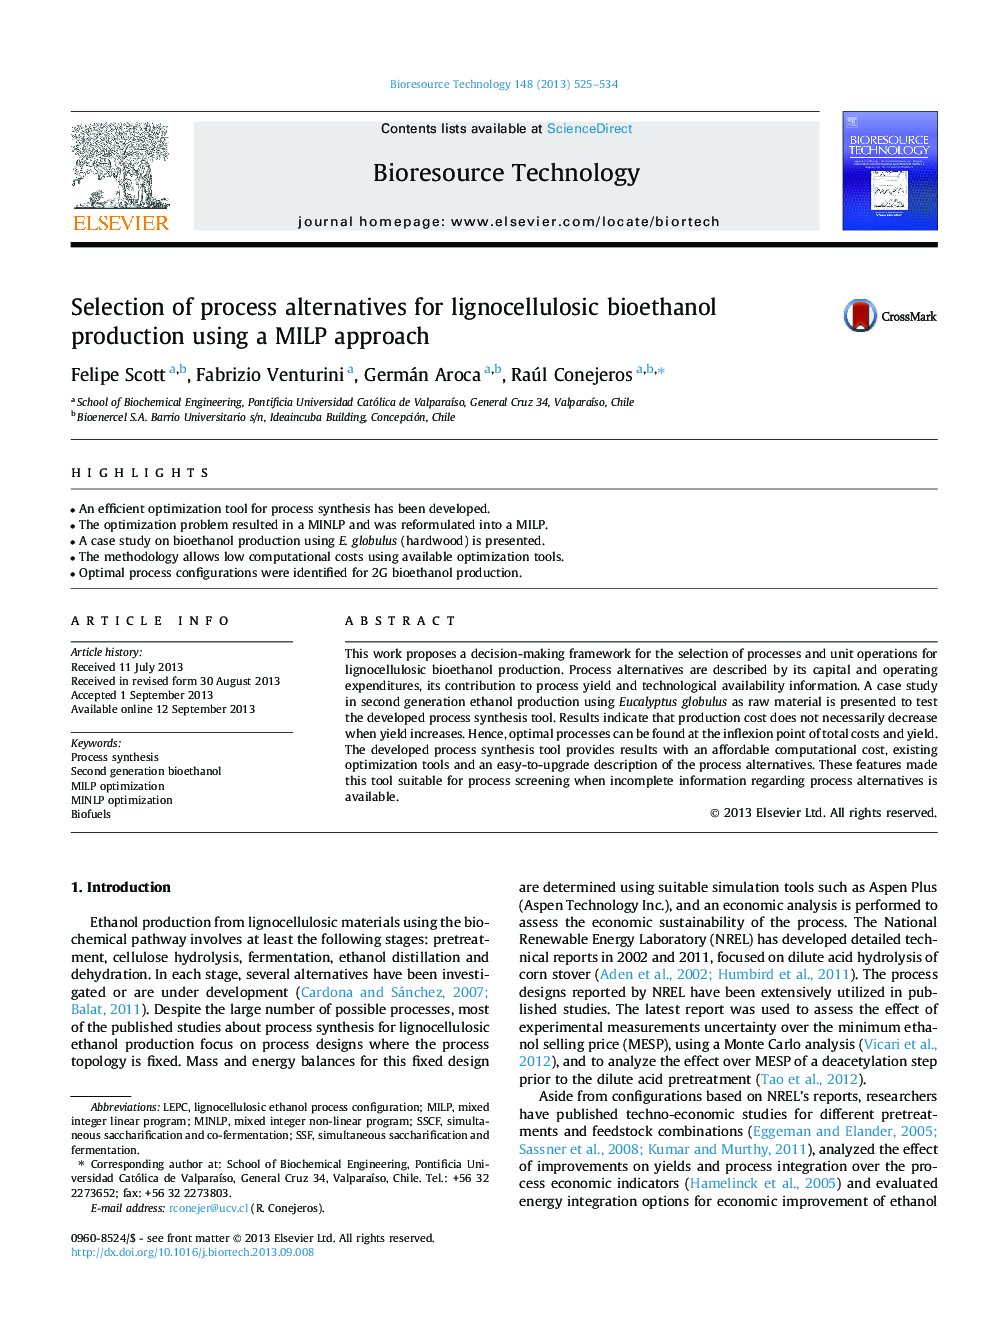 Selection of process alternatives for lignocellulosic bioethanol production using a MILP approach